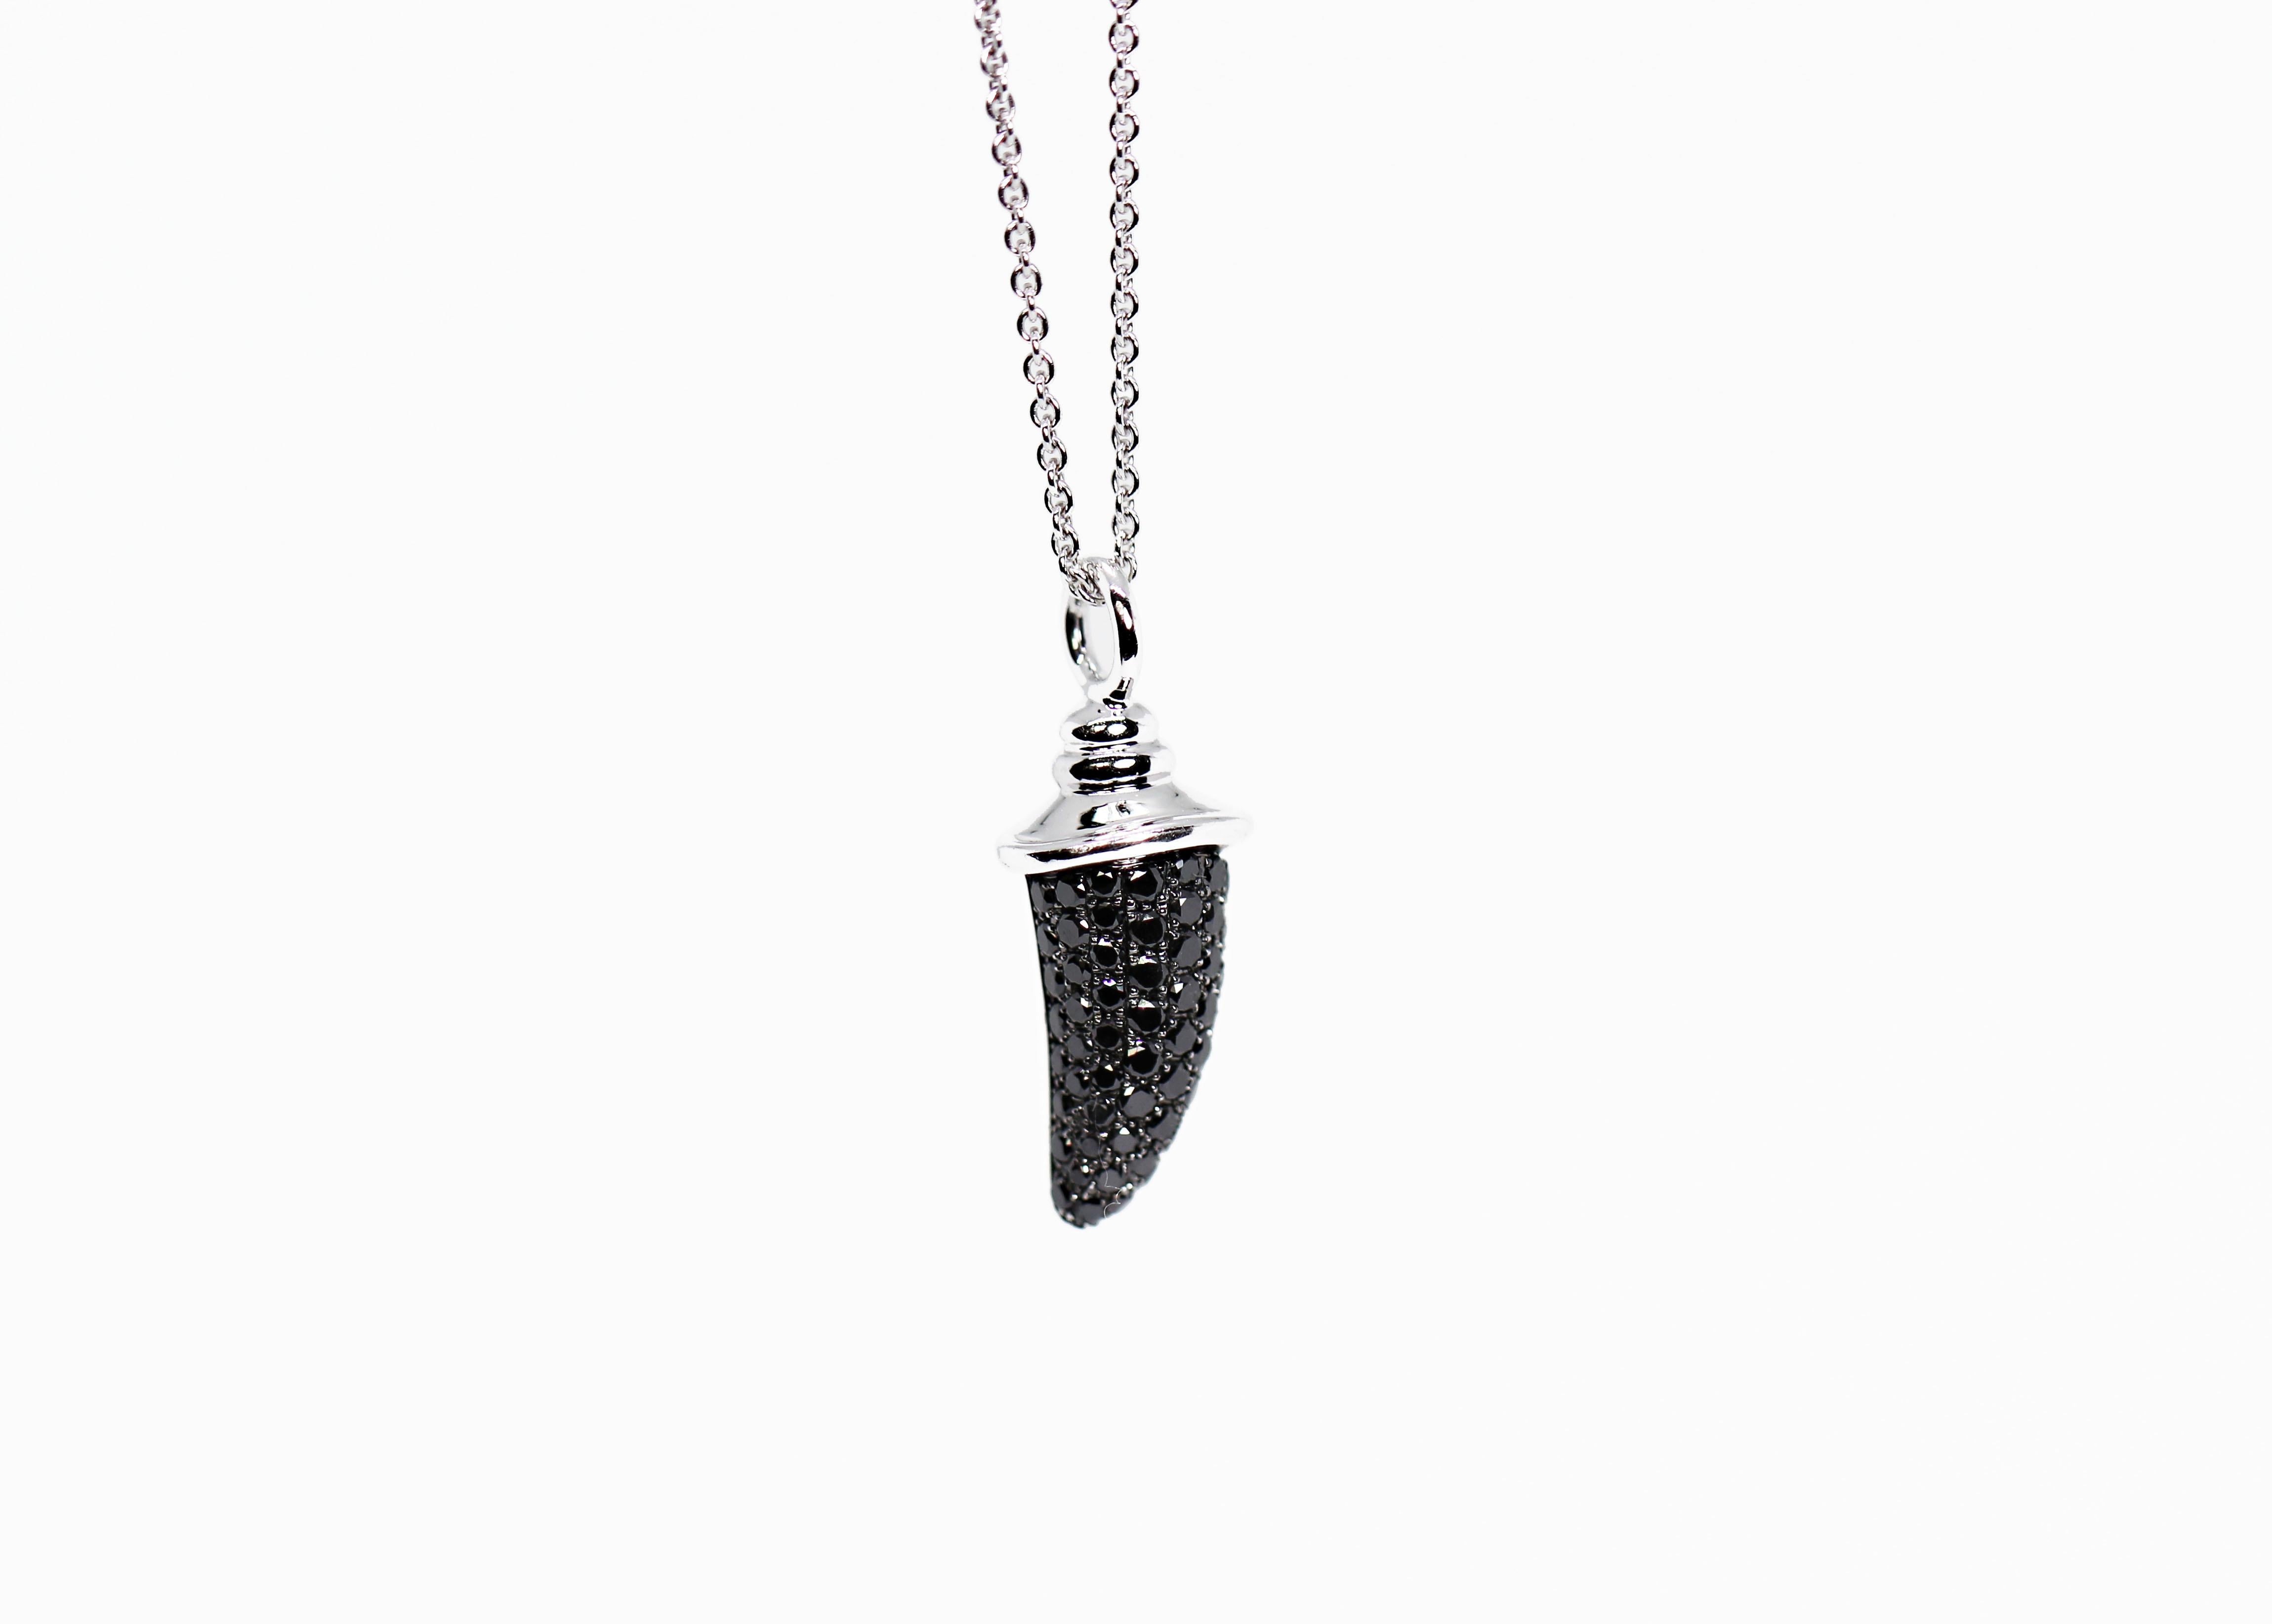 Theo Fennell London 18 Carat White Gold and Black Diamond Horn Pendant and Chain 1